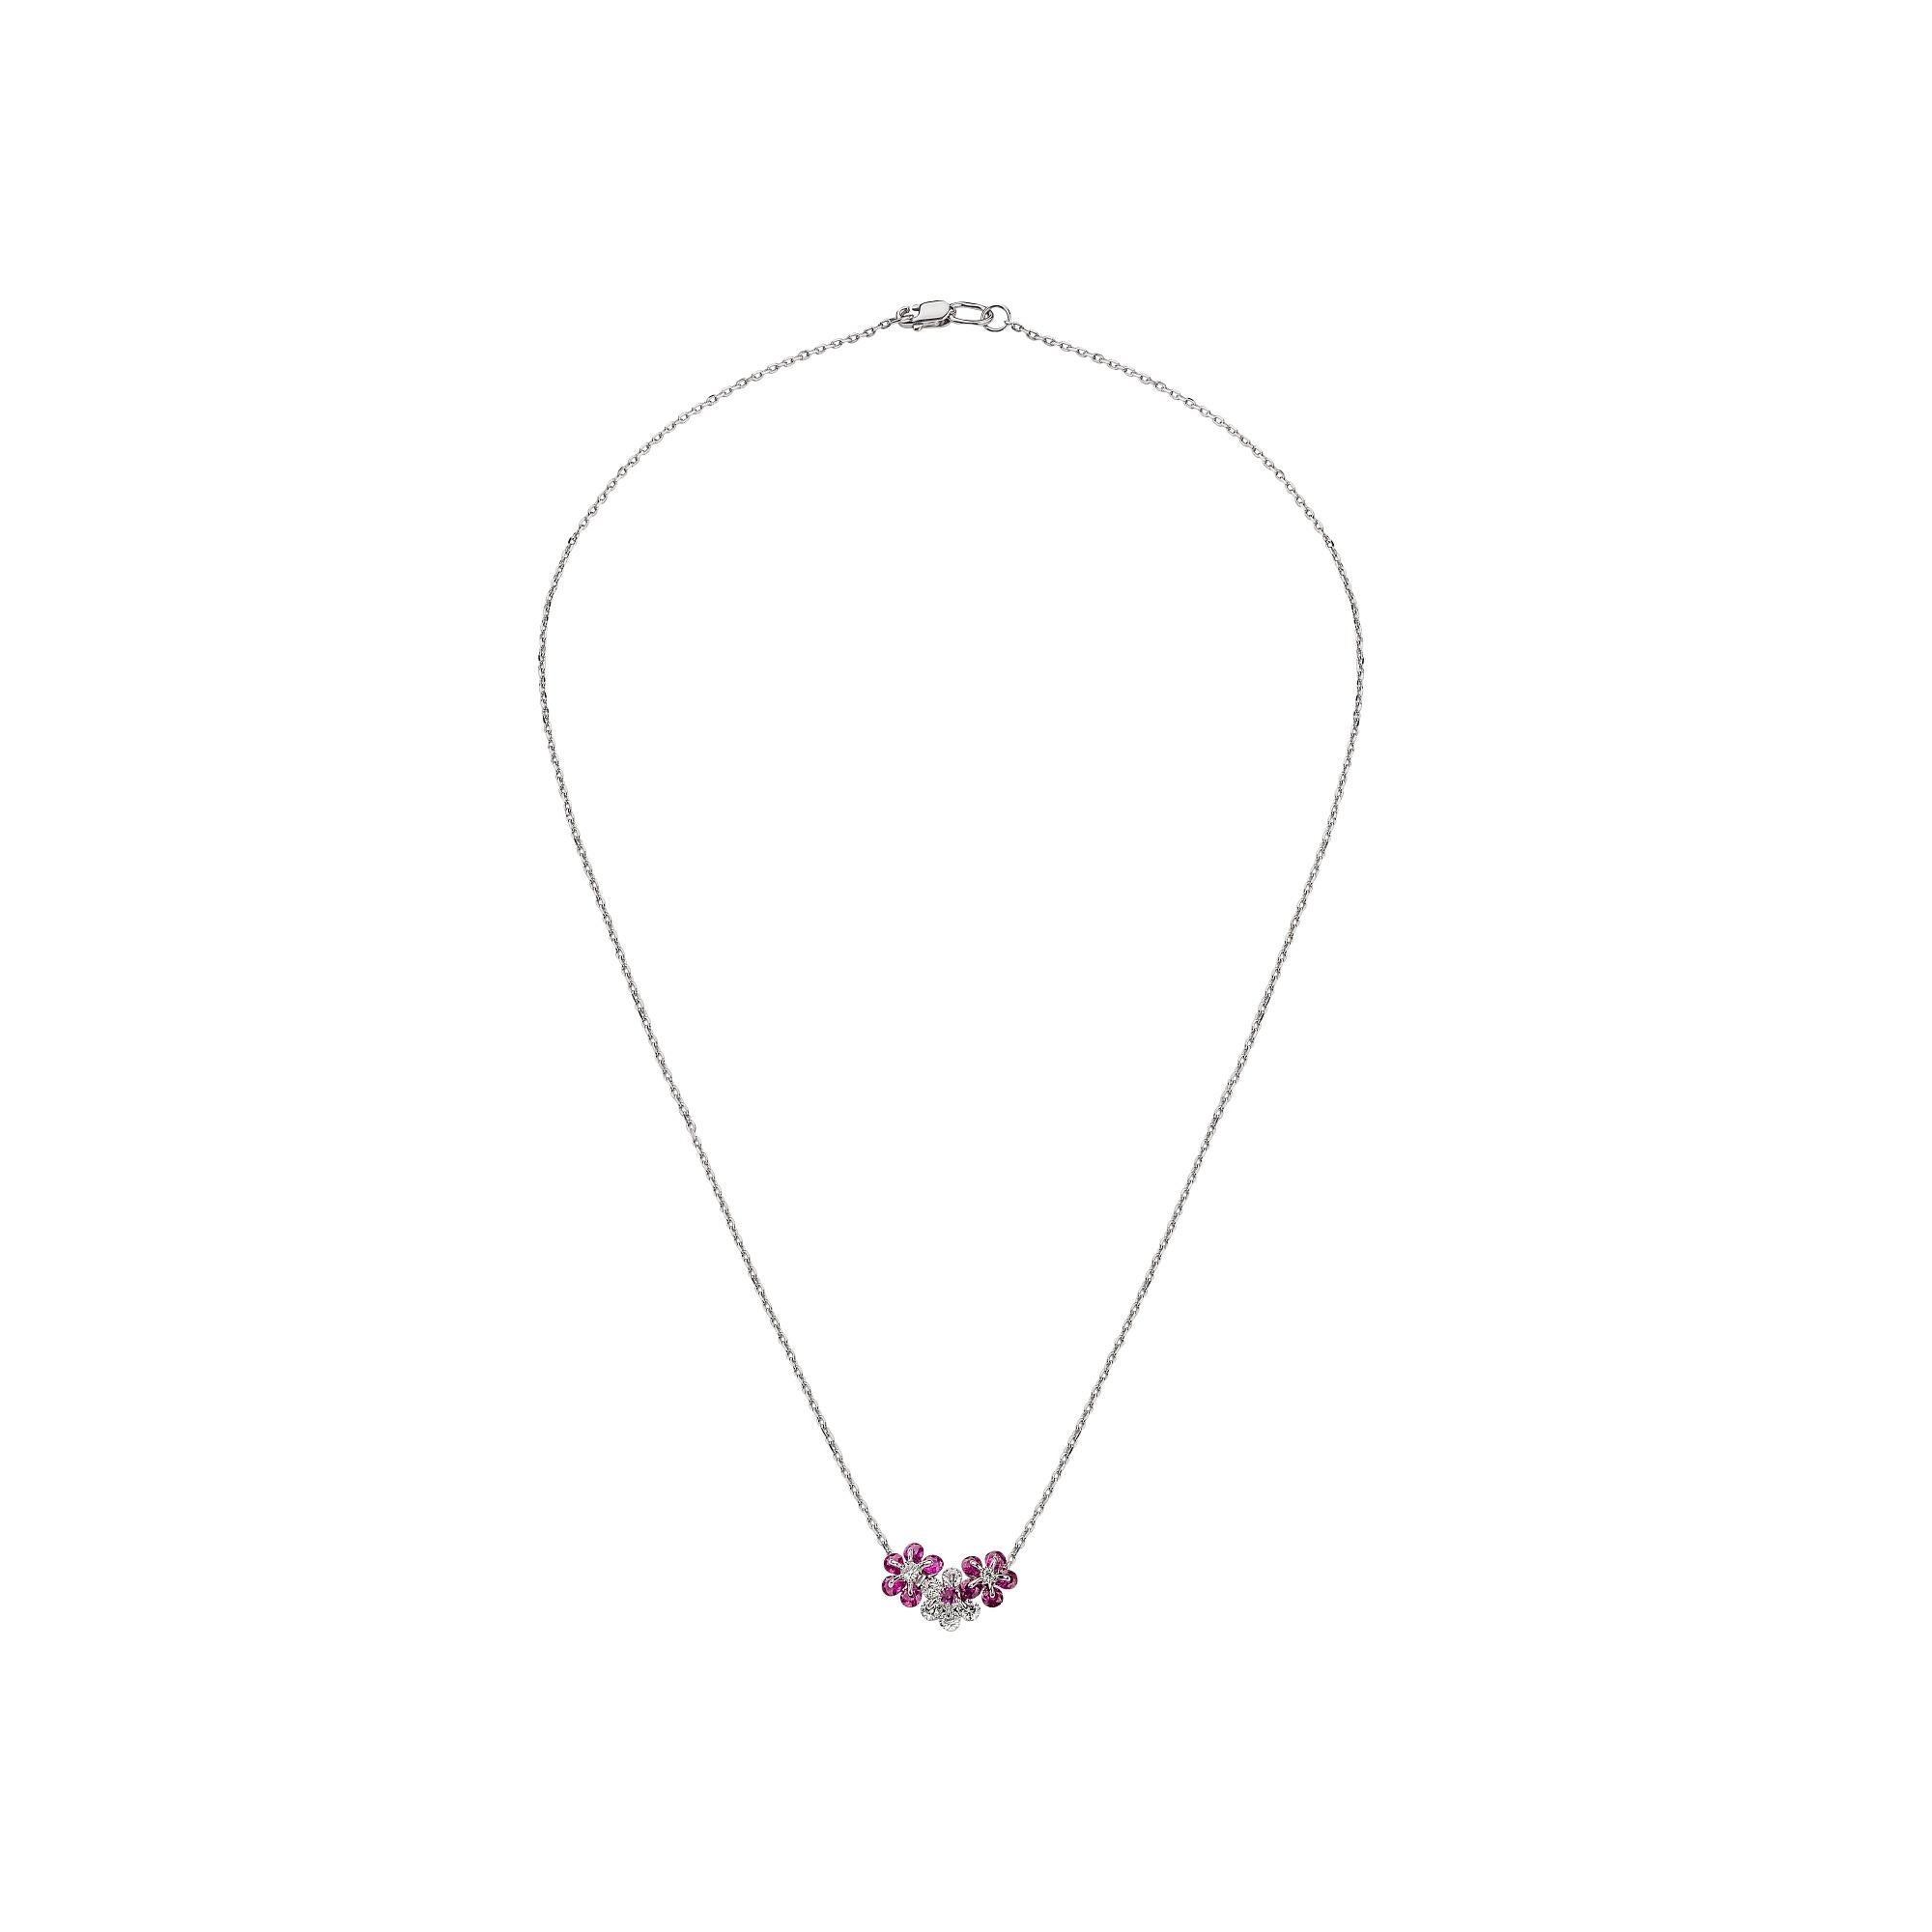 Diamond and precise-cut rubies are mounted carefully in delicate flower design, employed innovative technology.  

Internationally patented, Waltzing Brilliance technology is an innovative jewellery invention patented by a leading Russian designer,